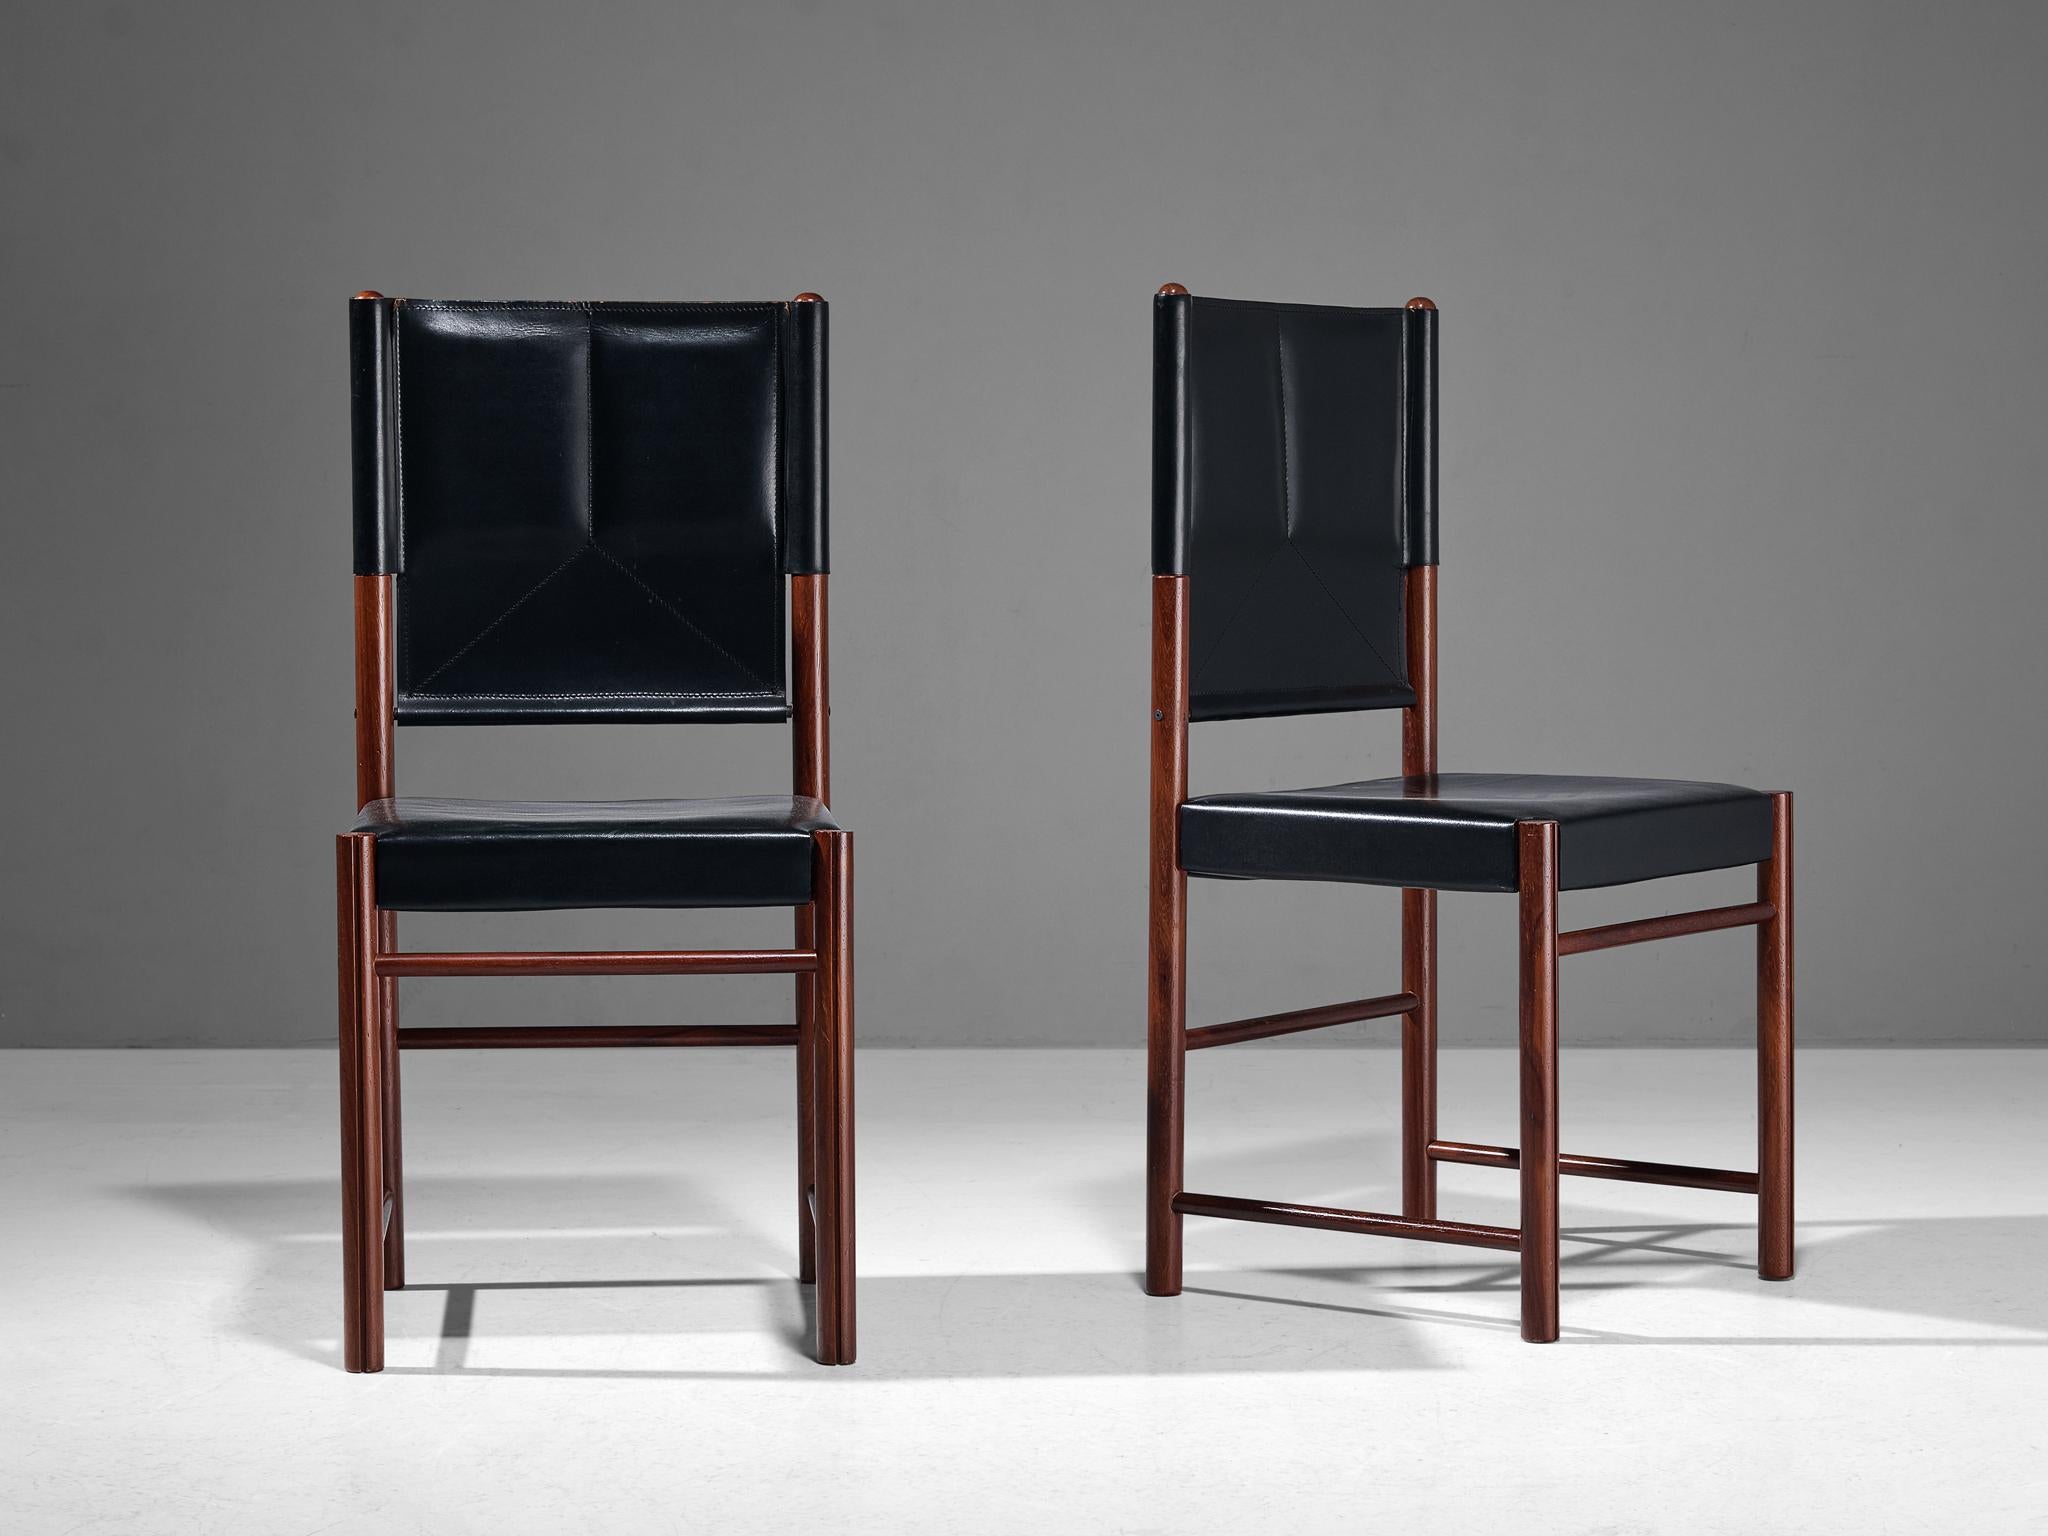 Pair of dining chairs, beech, leather, Italy, 1970s

A delicate pair of chairs that are well-proportioned and will elevate one's dining area in a vigorous and strong way. The wooden frame is composed of cylindrical beams to which the leather is